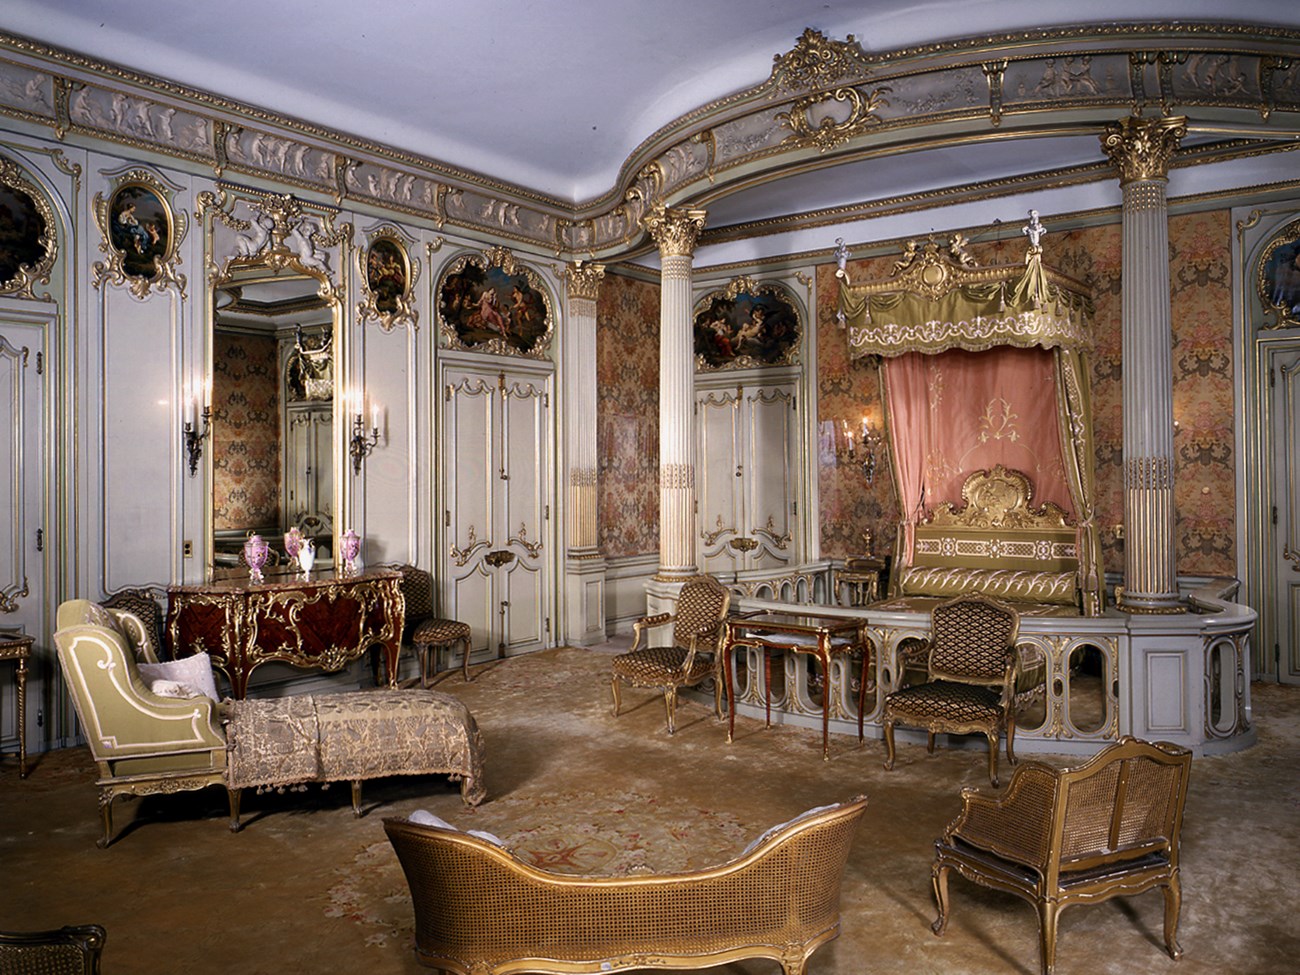 A large bedroom with silk upholstered and paneled walls.